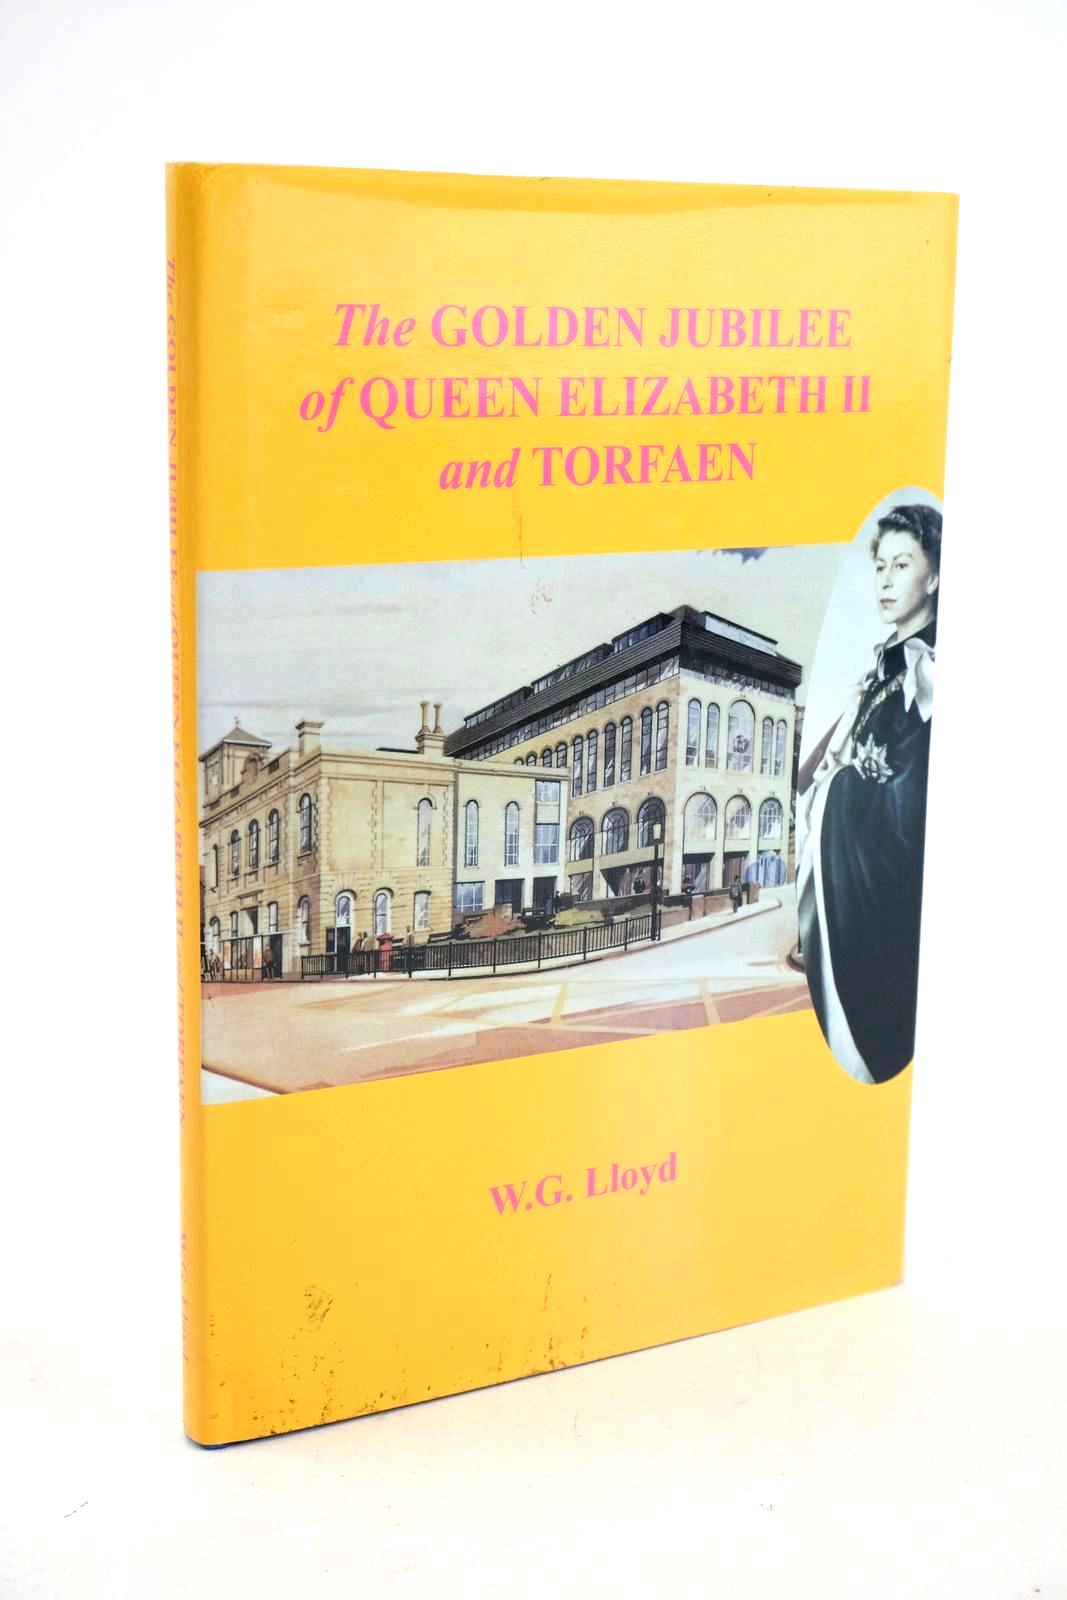 Photo of THE GOLDEN JUBILEE OF QUEEN ELIZABETH II AND TORFAEN written by Lloyd, W.G. published by HSW Print (STOCK CODE: 1327156)  for sale by Stella & Rose's Books